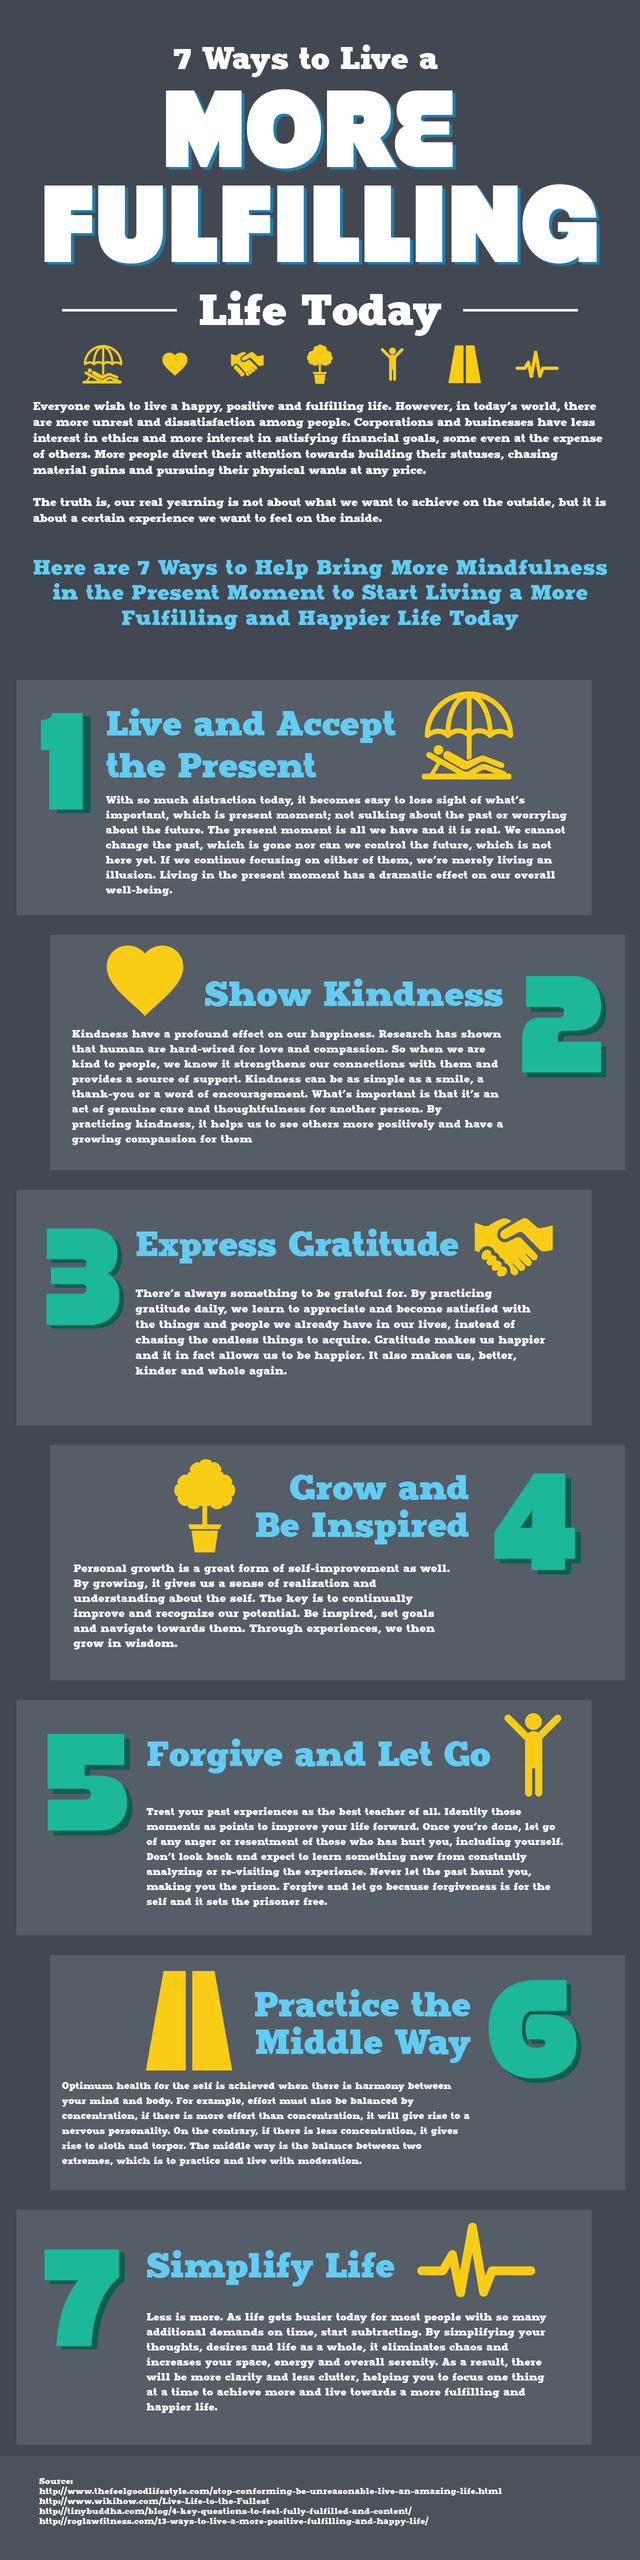 7 Ways to Live a More Fulfulling Life Today.png